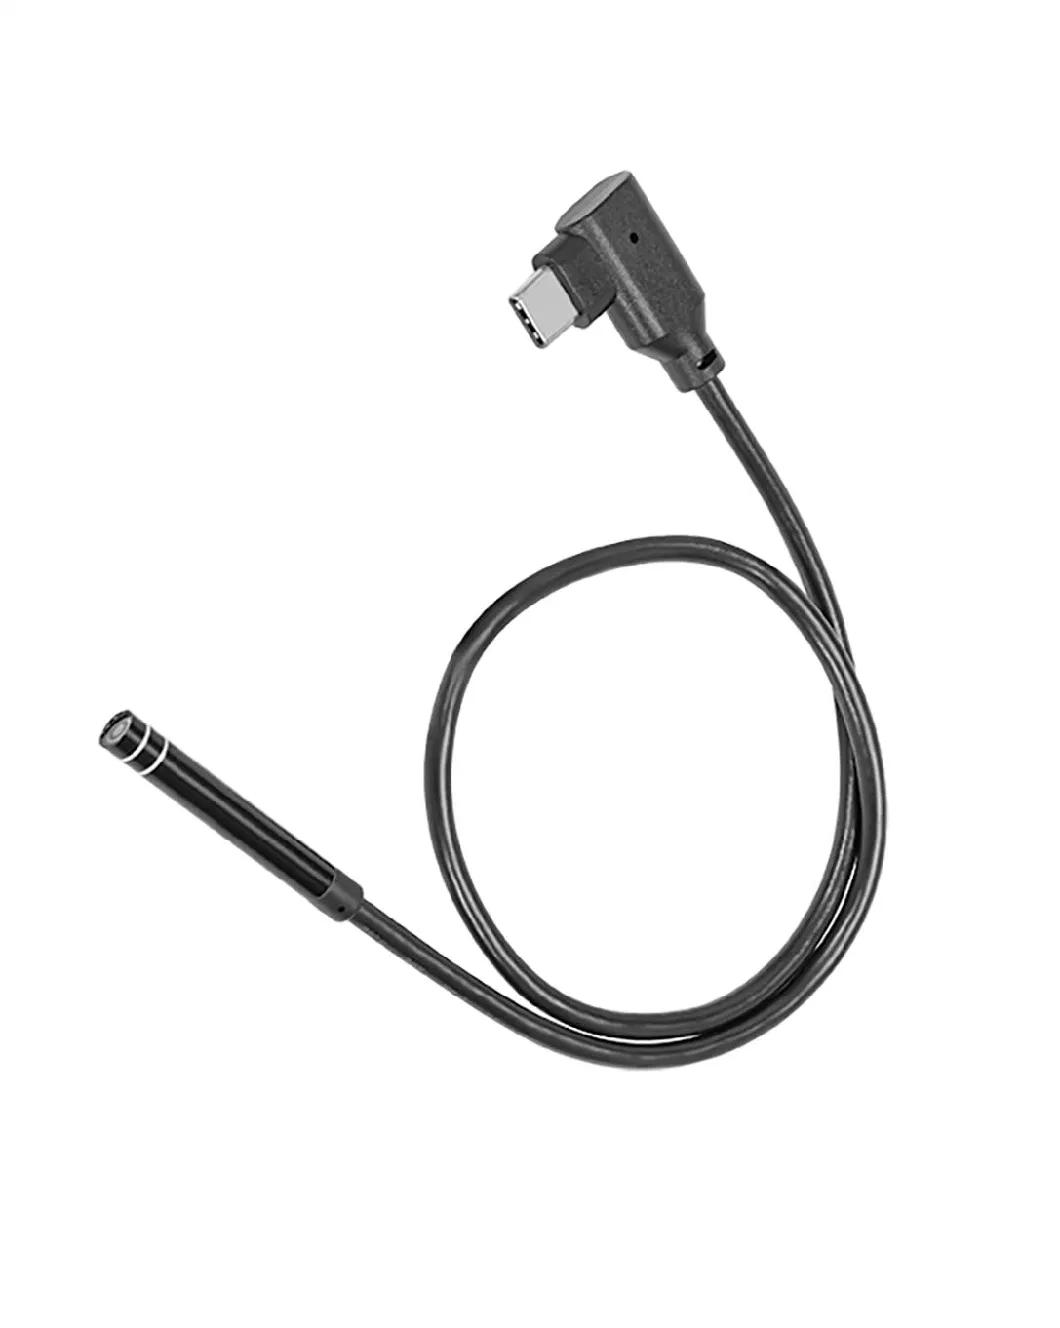 USB 3.1 Male to Camera Cable